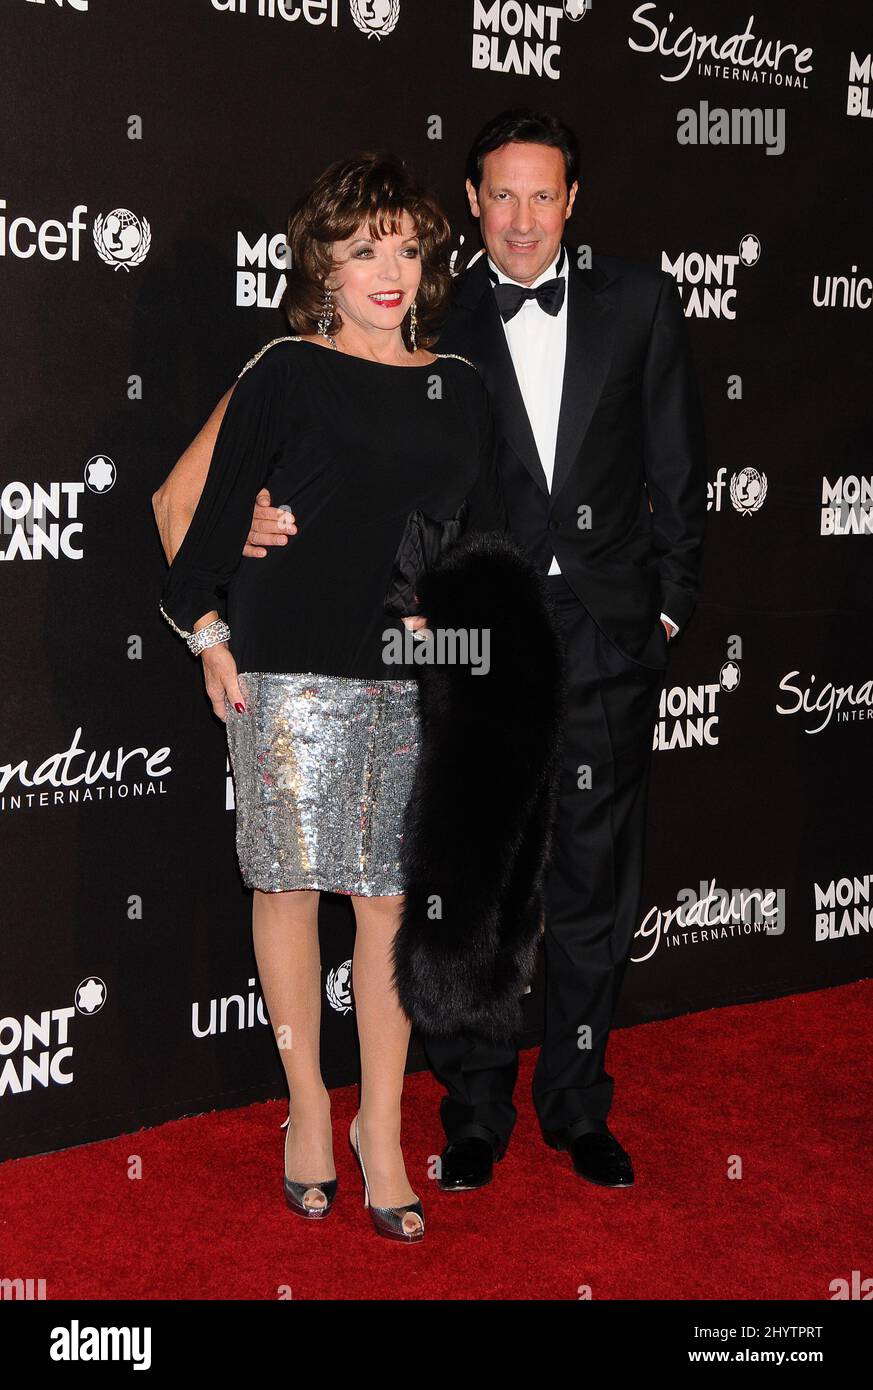 Joan Collins und Percy Gibson bei der Montblanc Signature for Good Charity Initiative in Los Angeles. Stockfoto